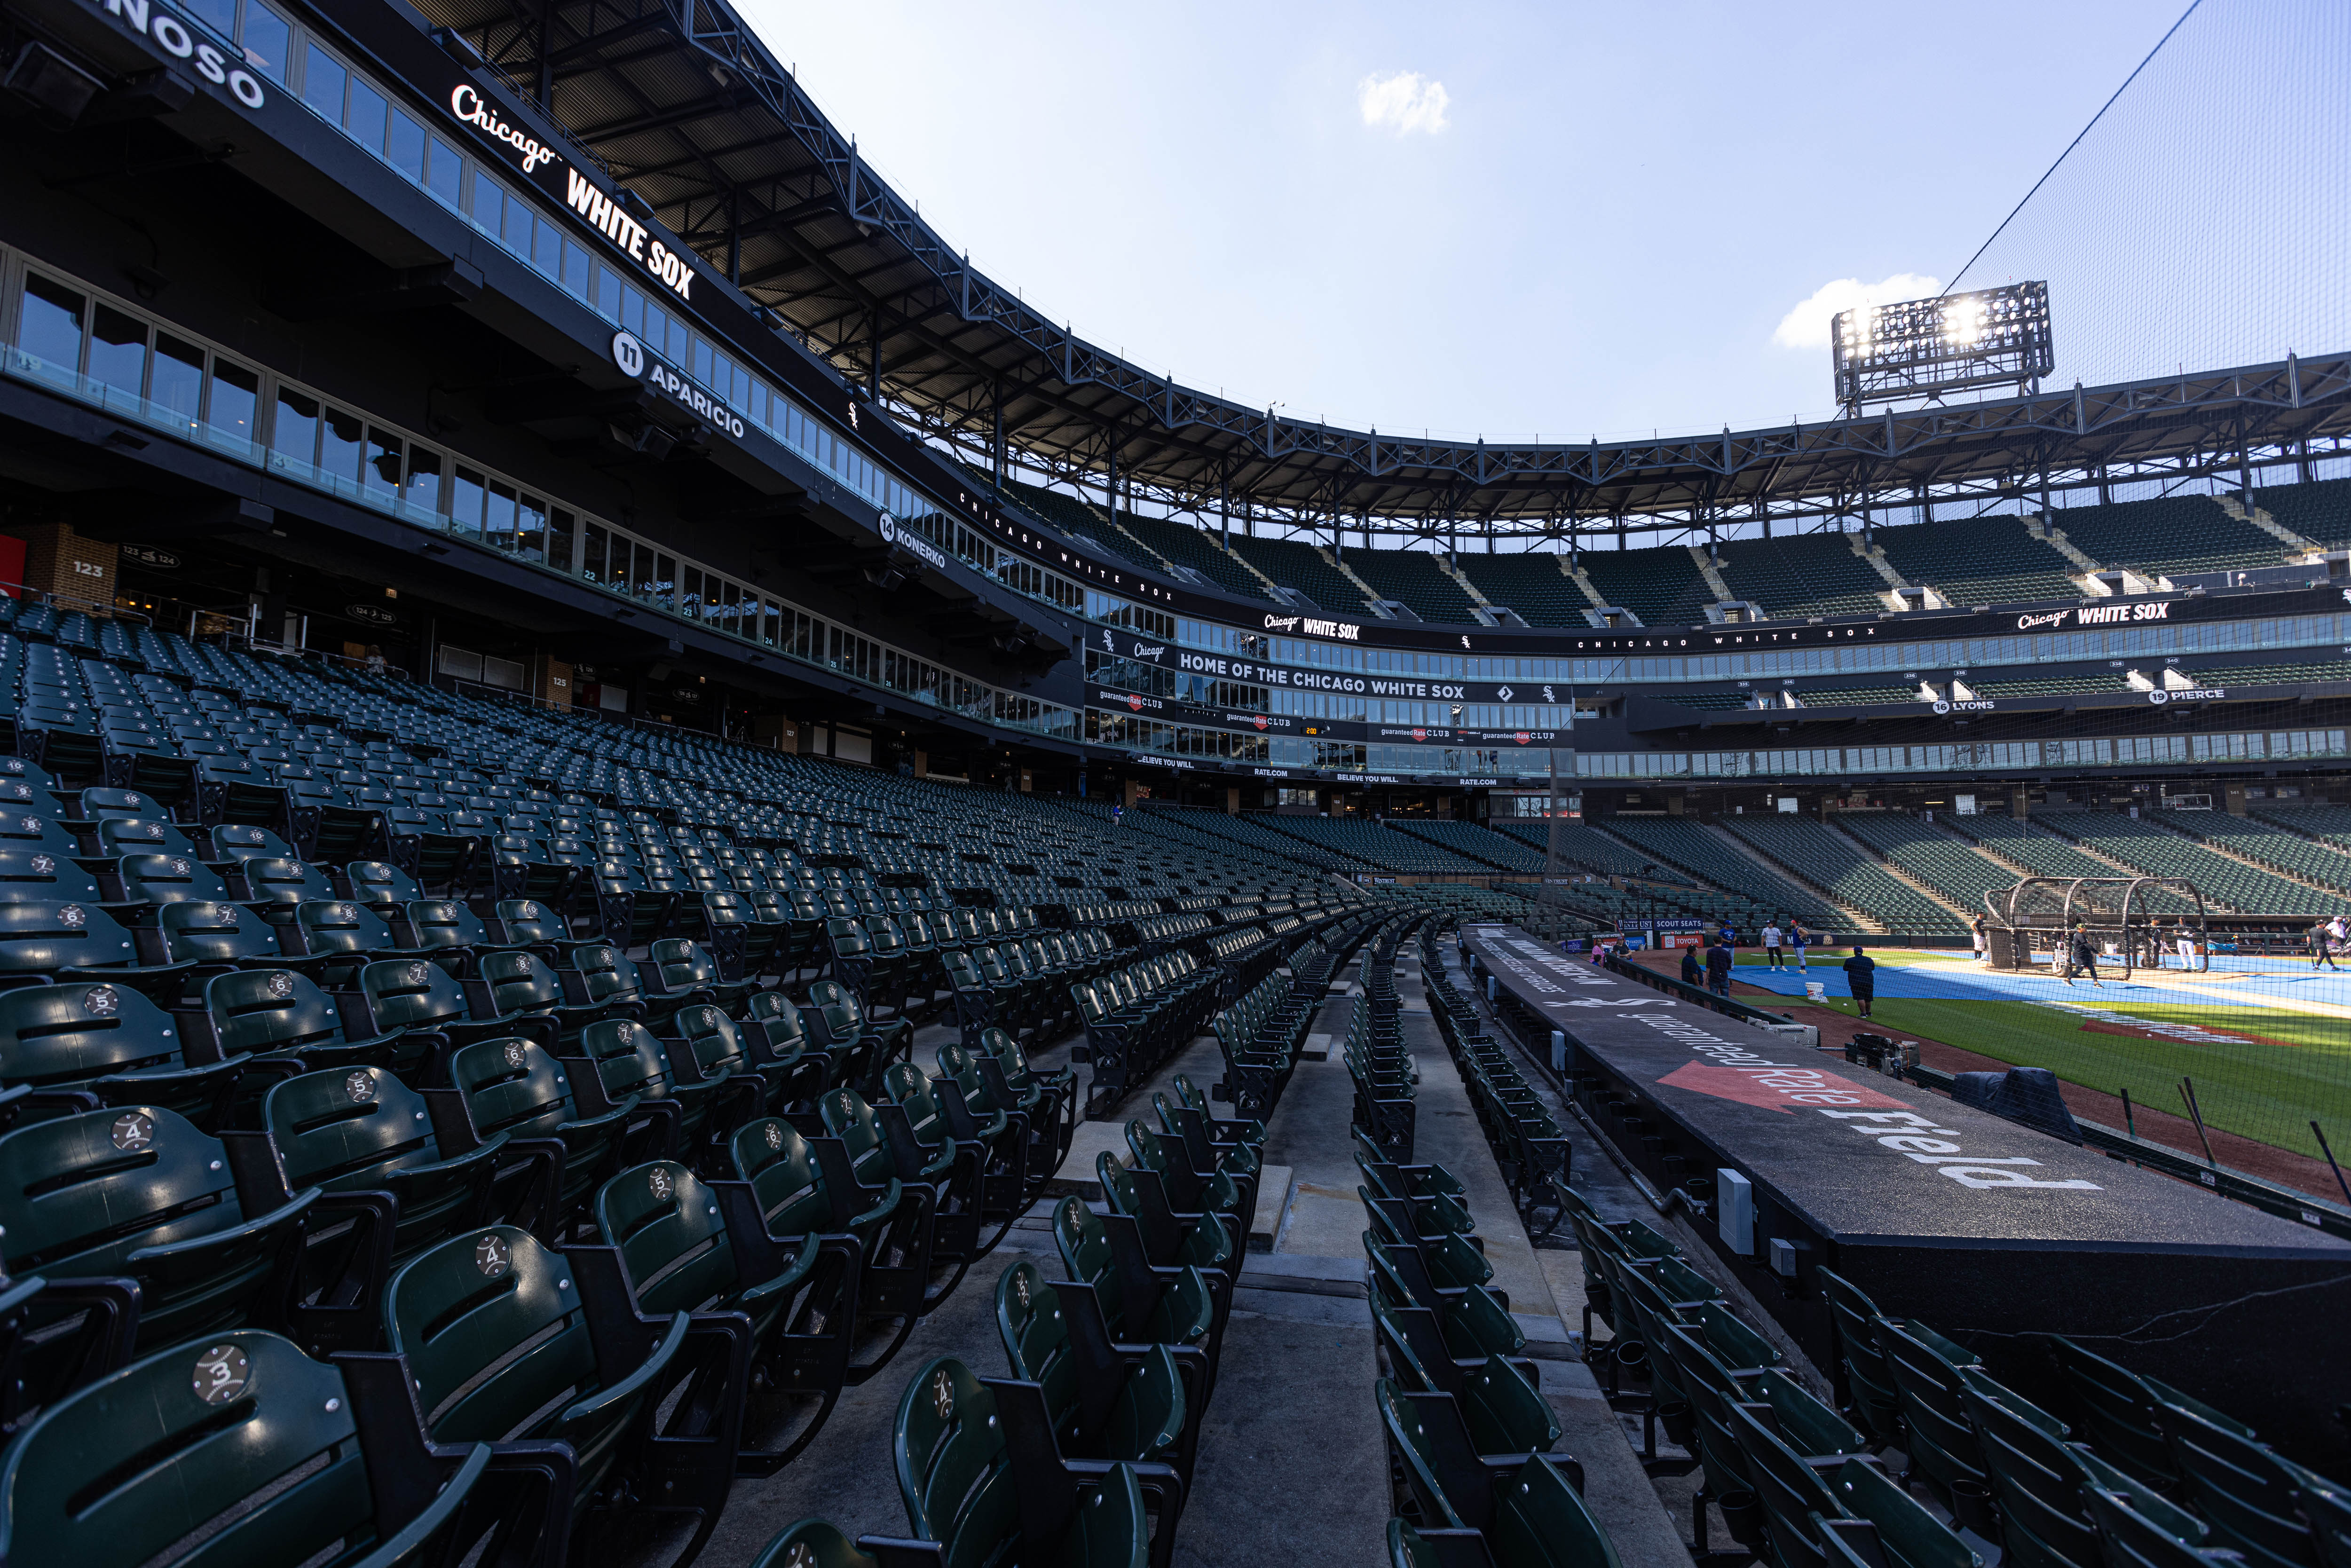 White Sox $1 tickets almost sold out